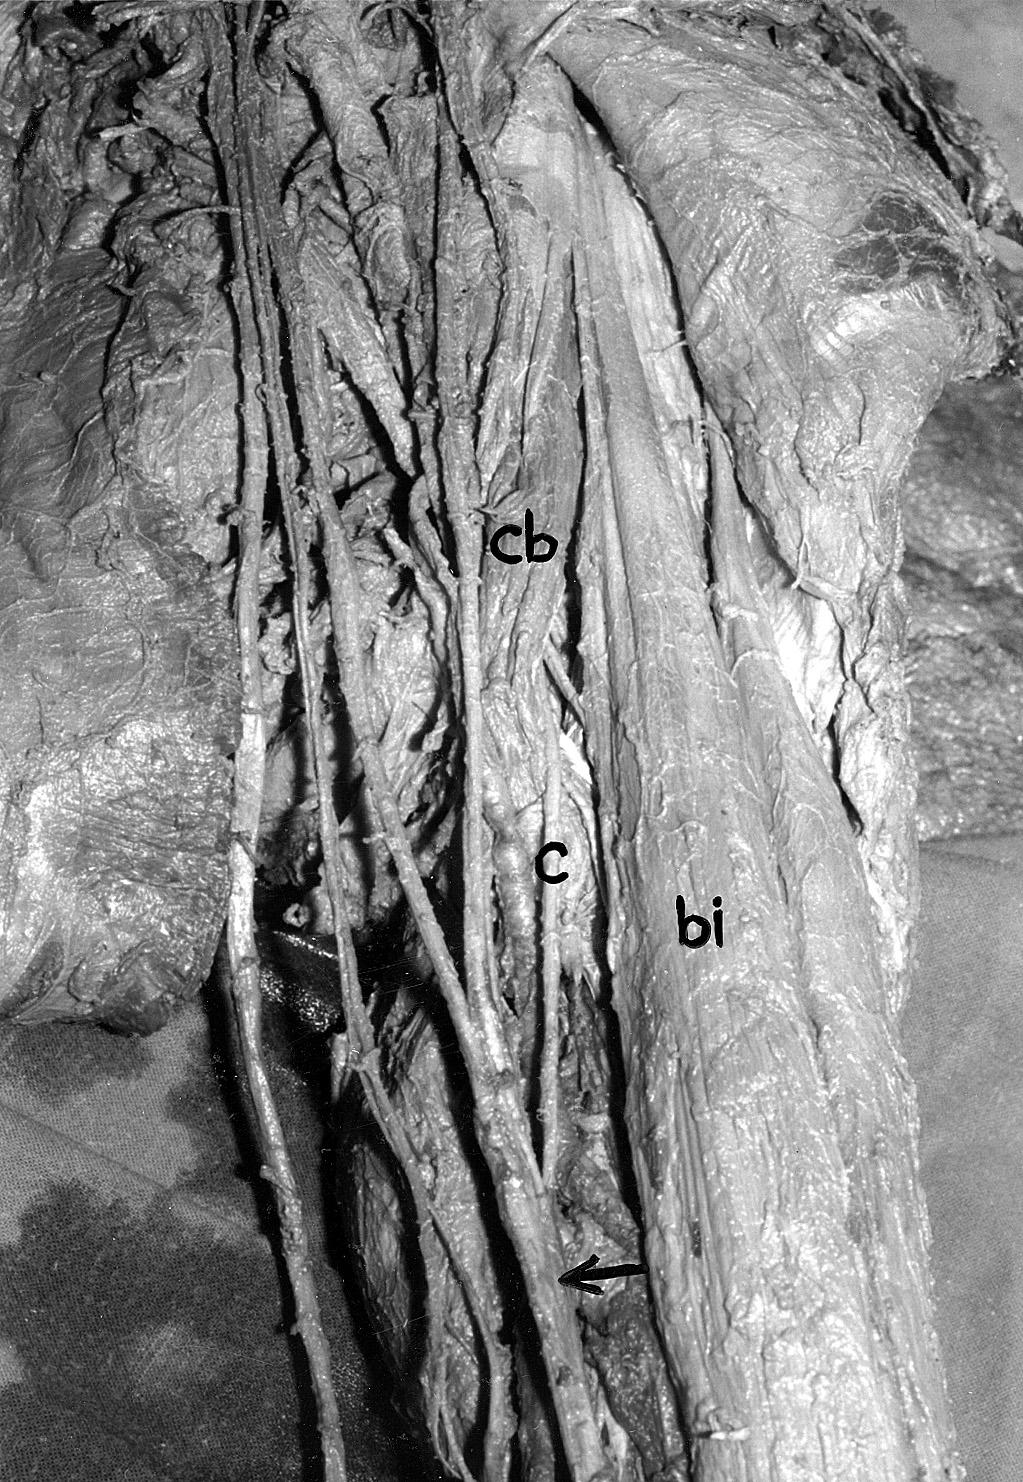 A photograph of the left axilla and arm regions of an adult human cadaver showing a communicating branch (c) between the median (arrow) and the musculocutaneous nerves.